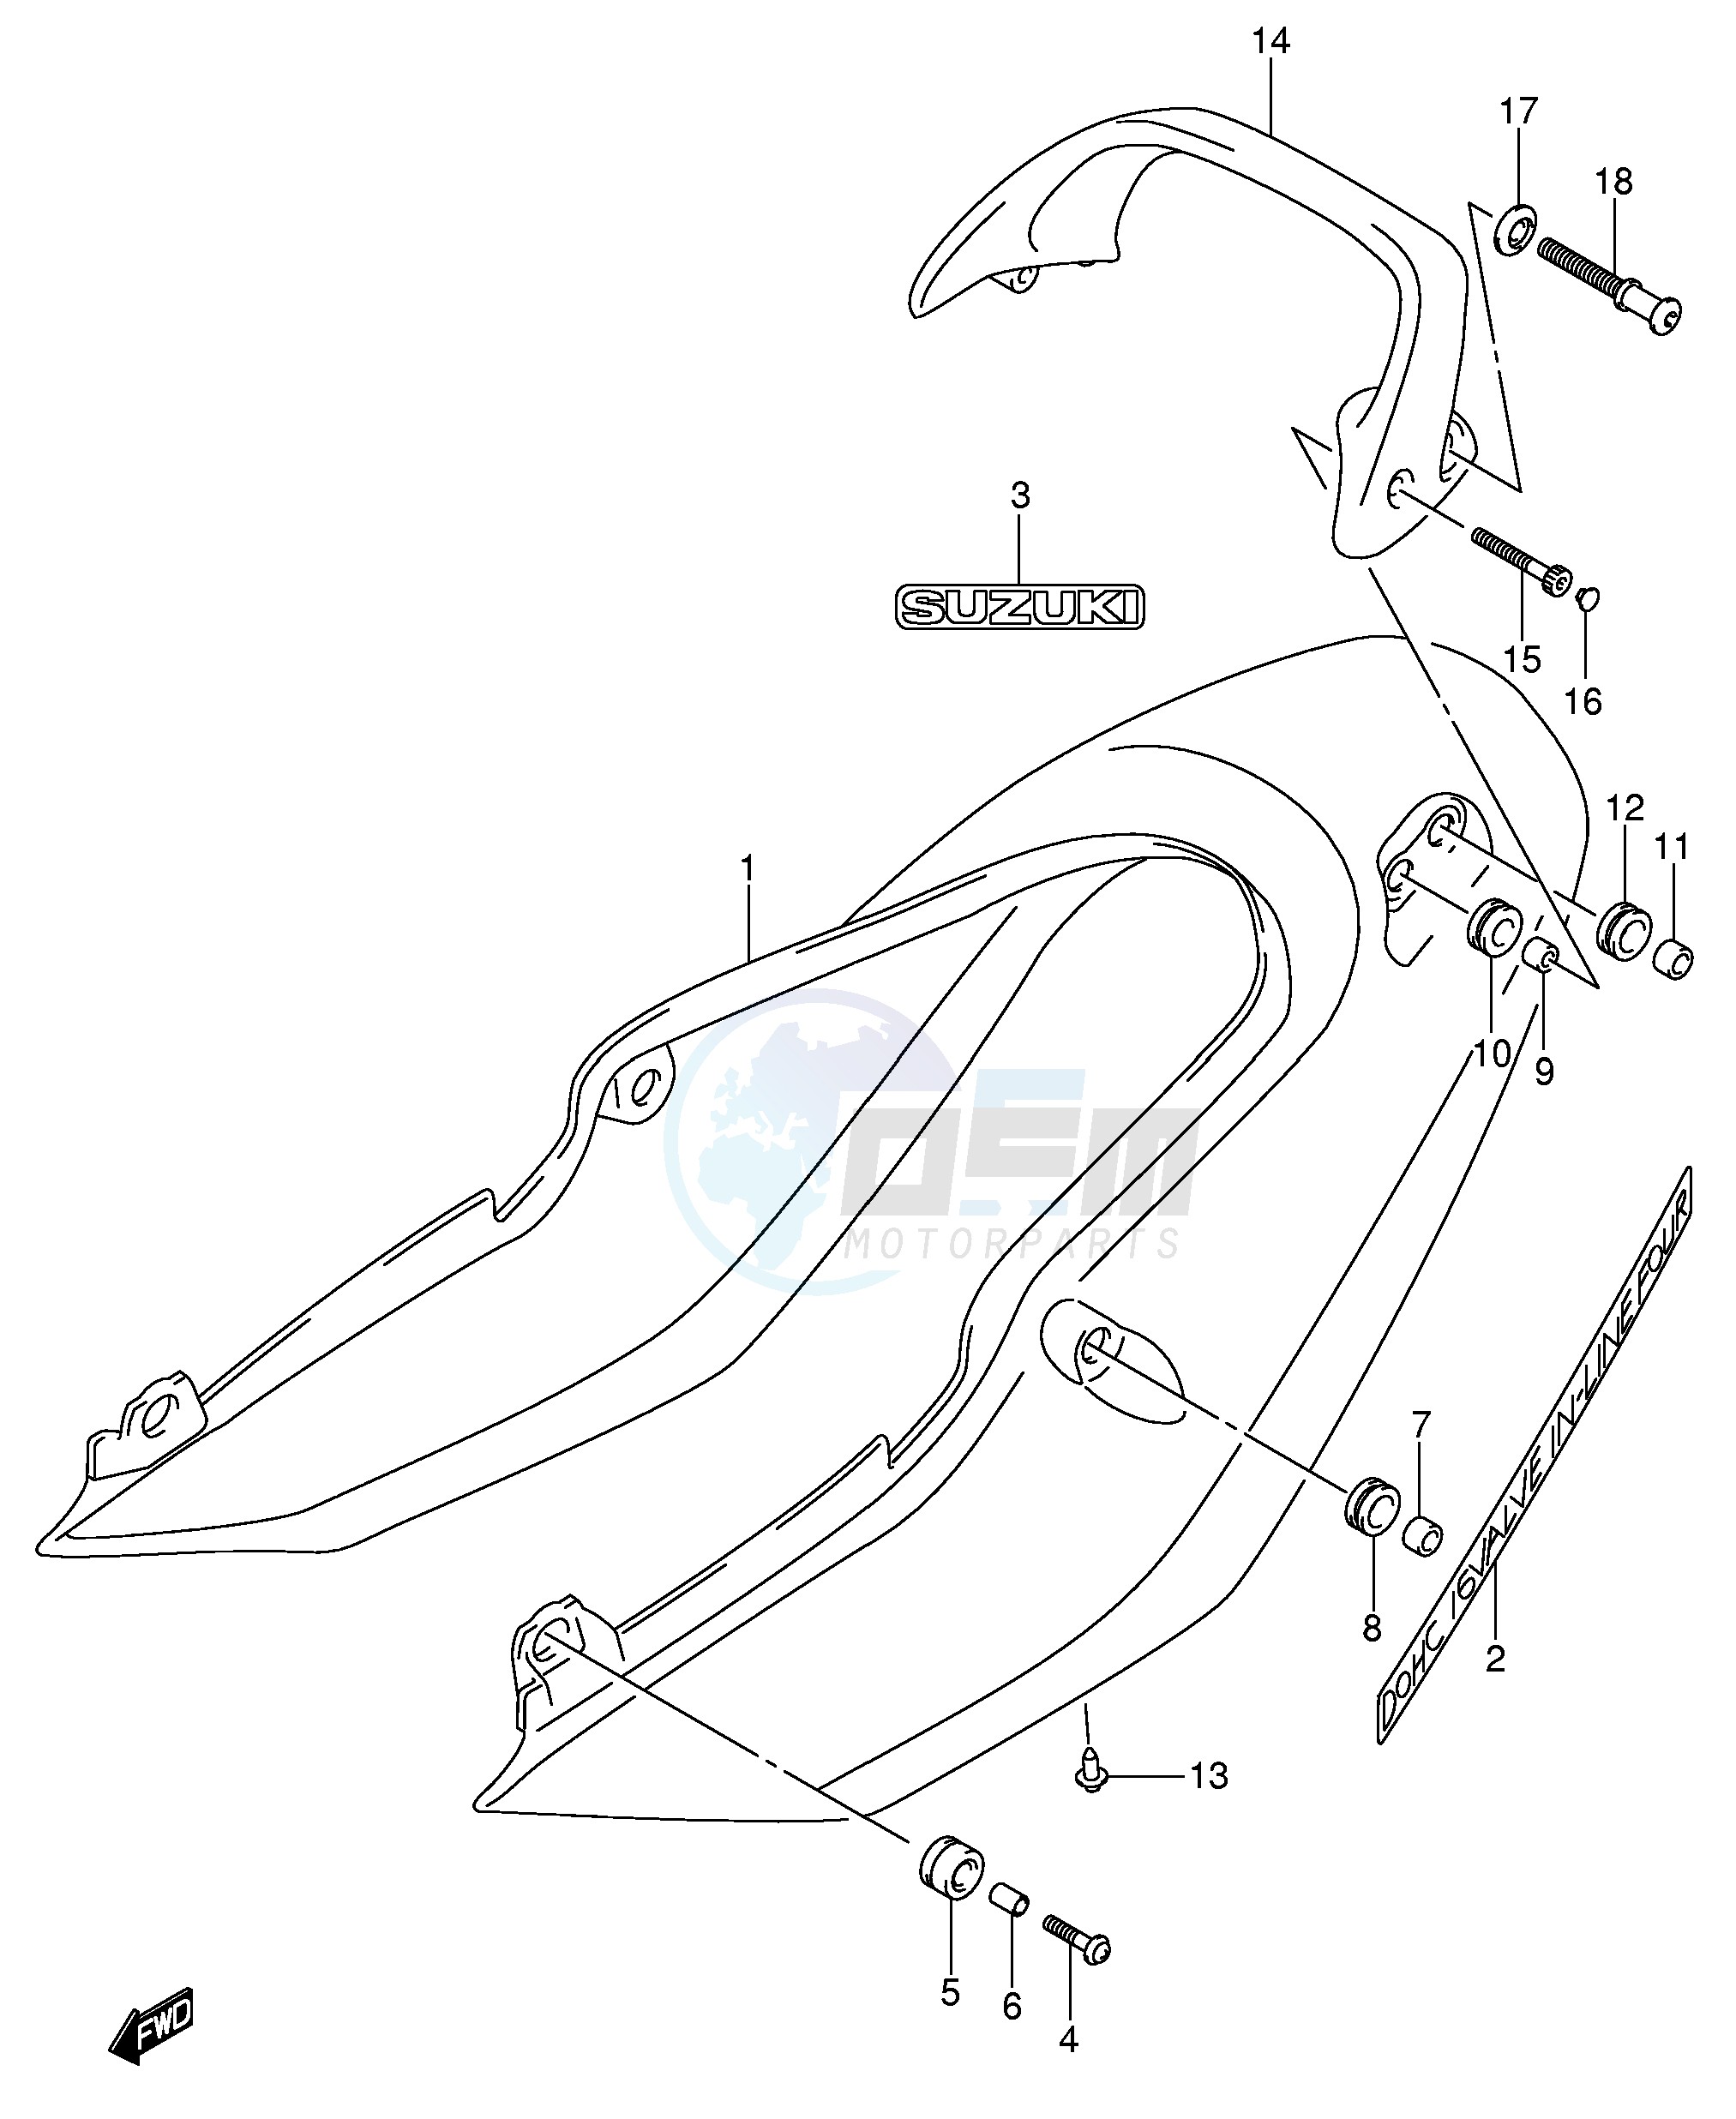 SEAT TAIL COVER (GSF1200SK5) blueprint